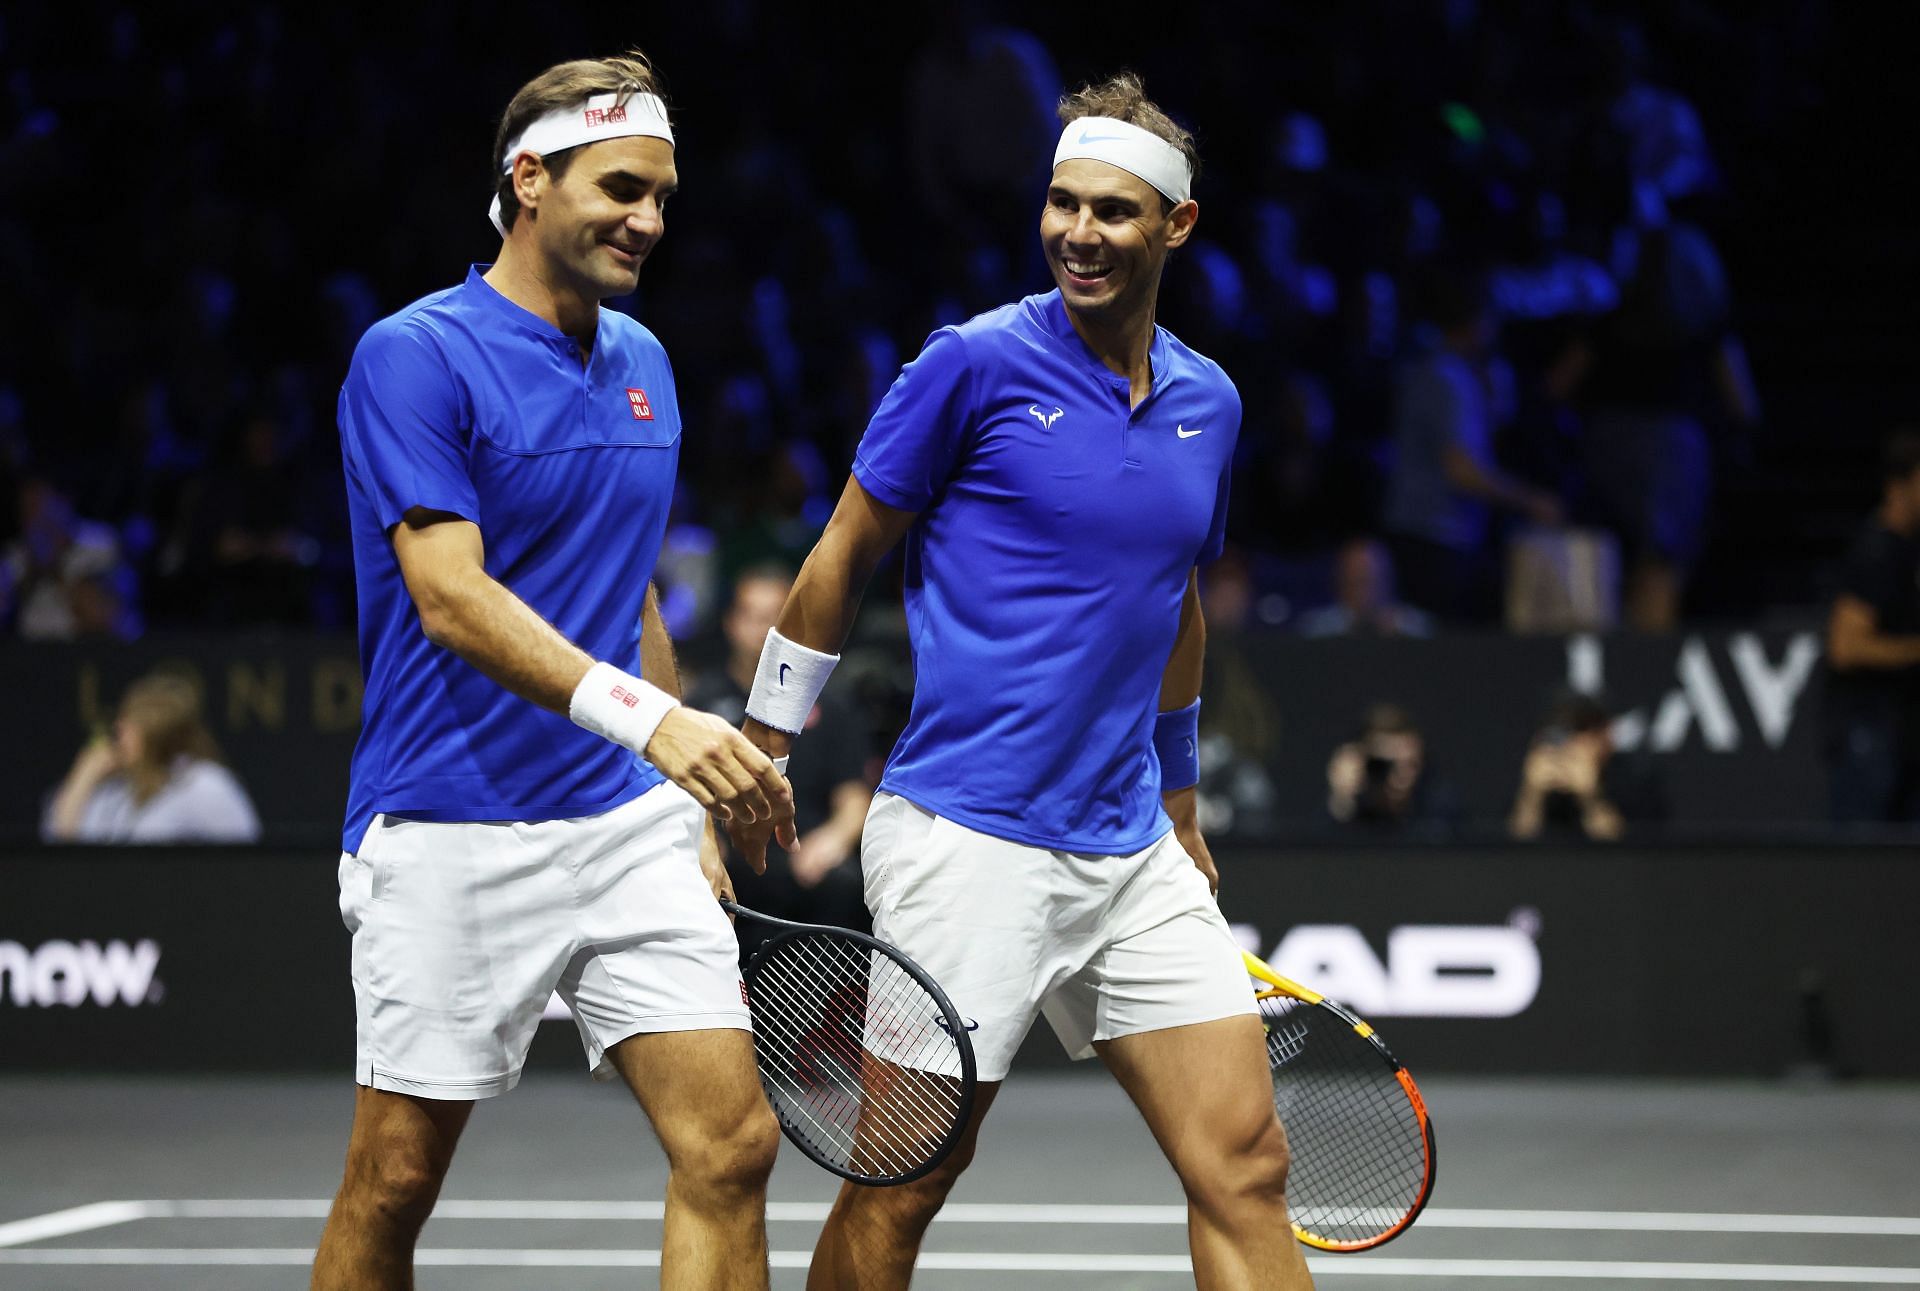 The two tennis greats at the 2022 Laver Cup